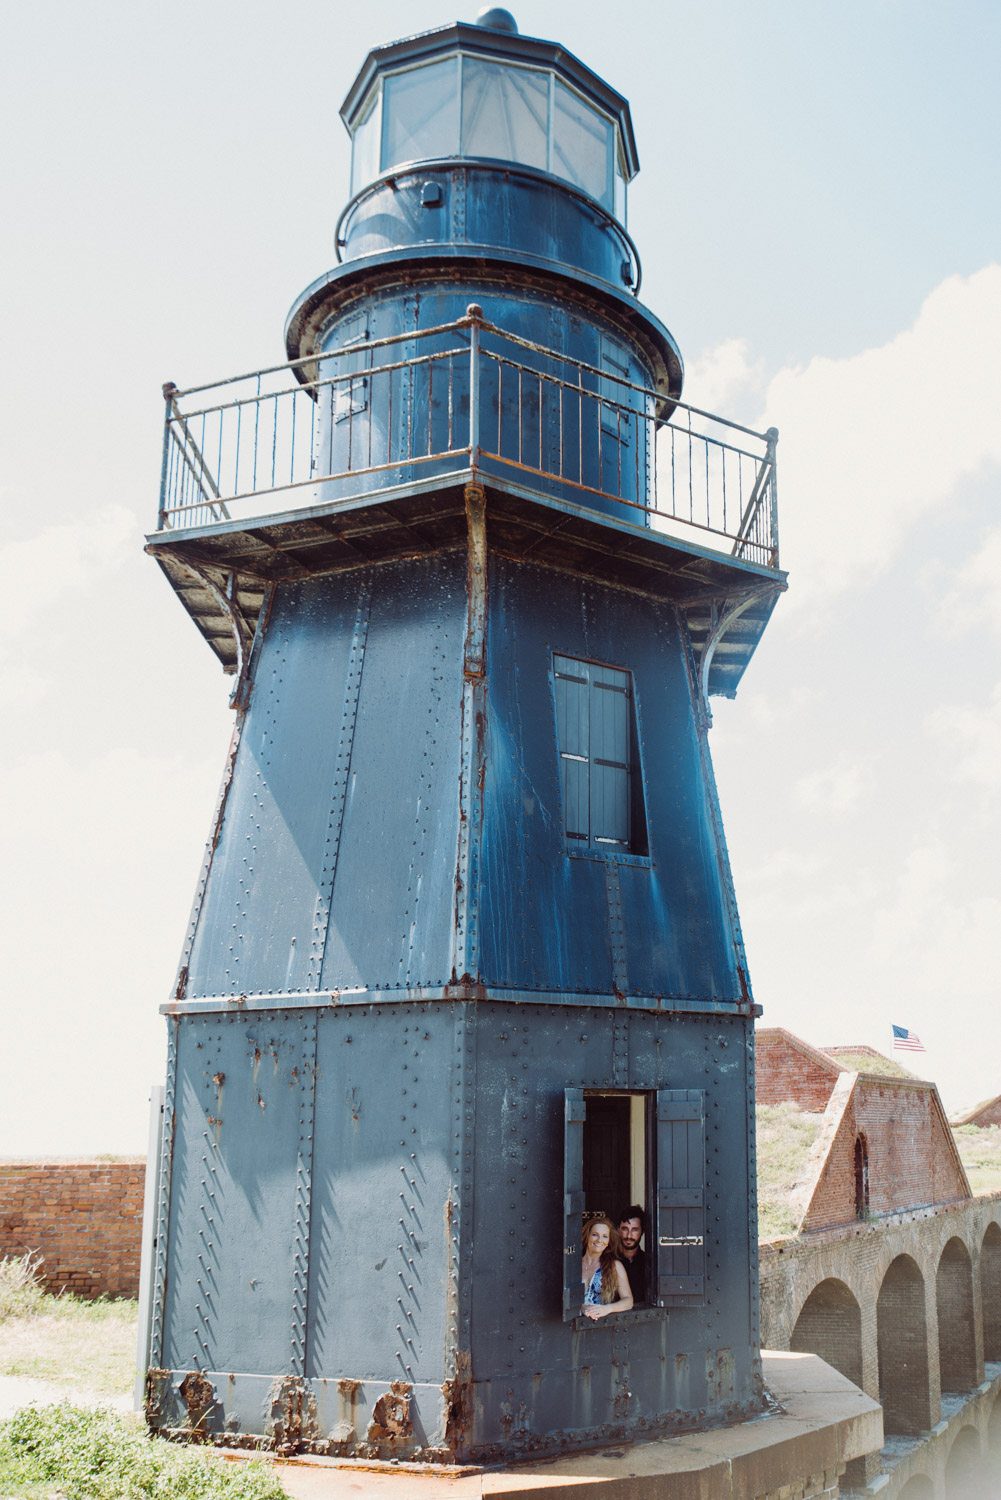 The blue lighthouse is a picturesque destination for engagement sessions in Dry Tortugas.